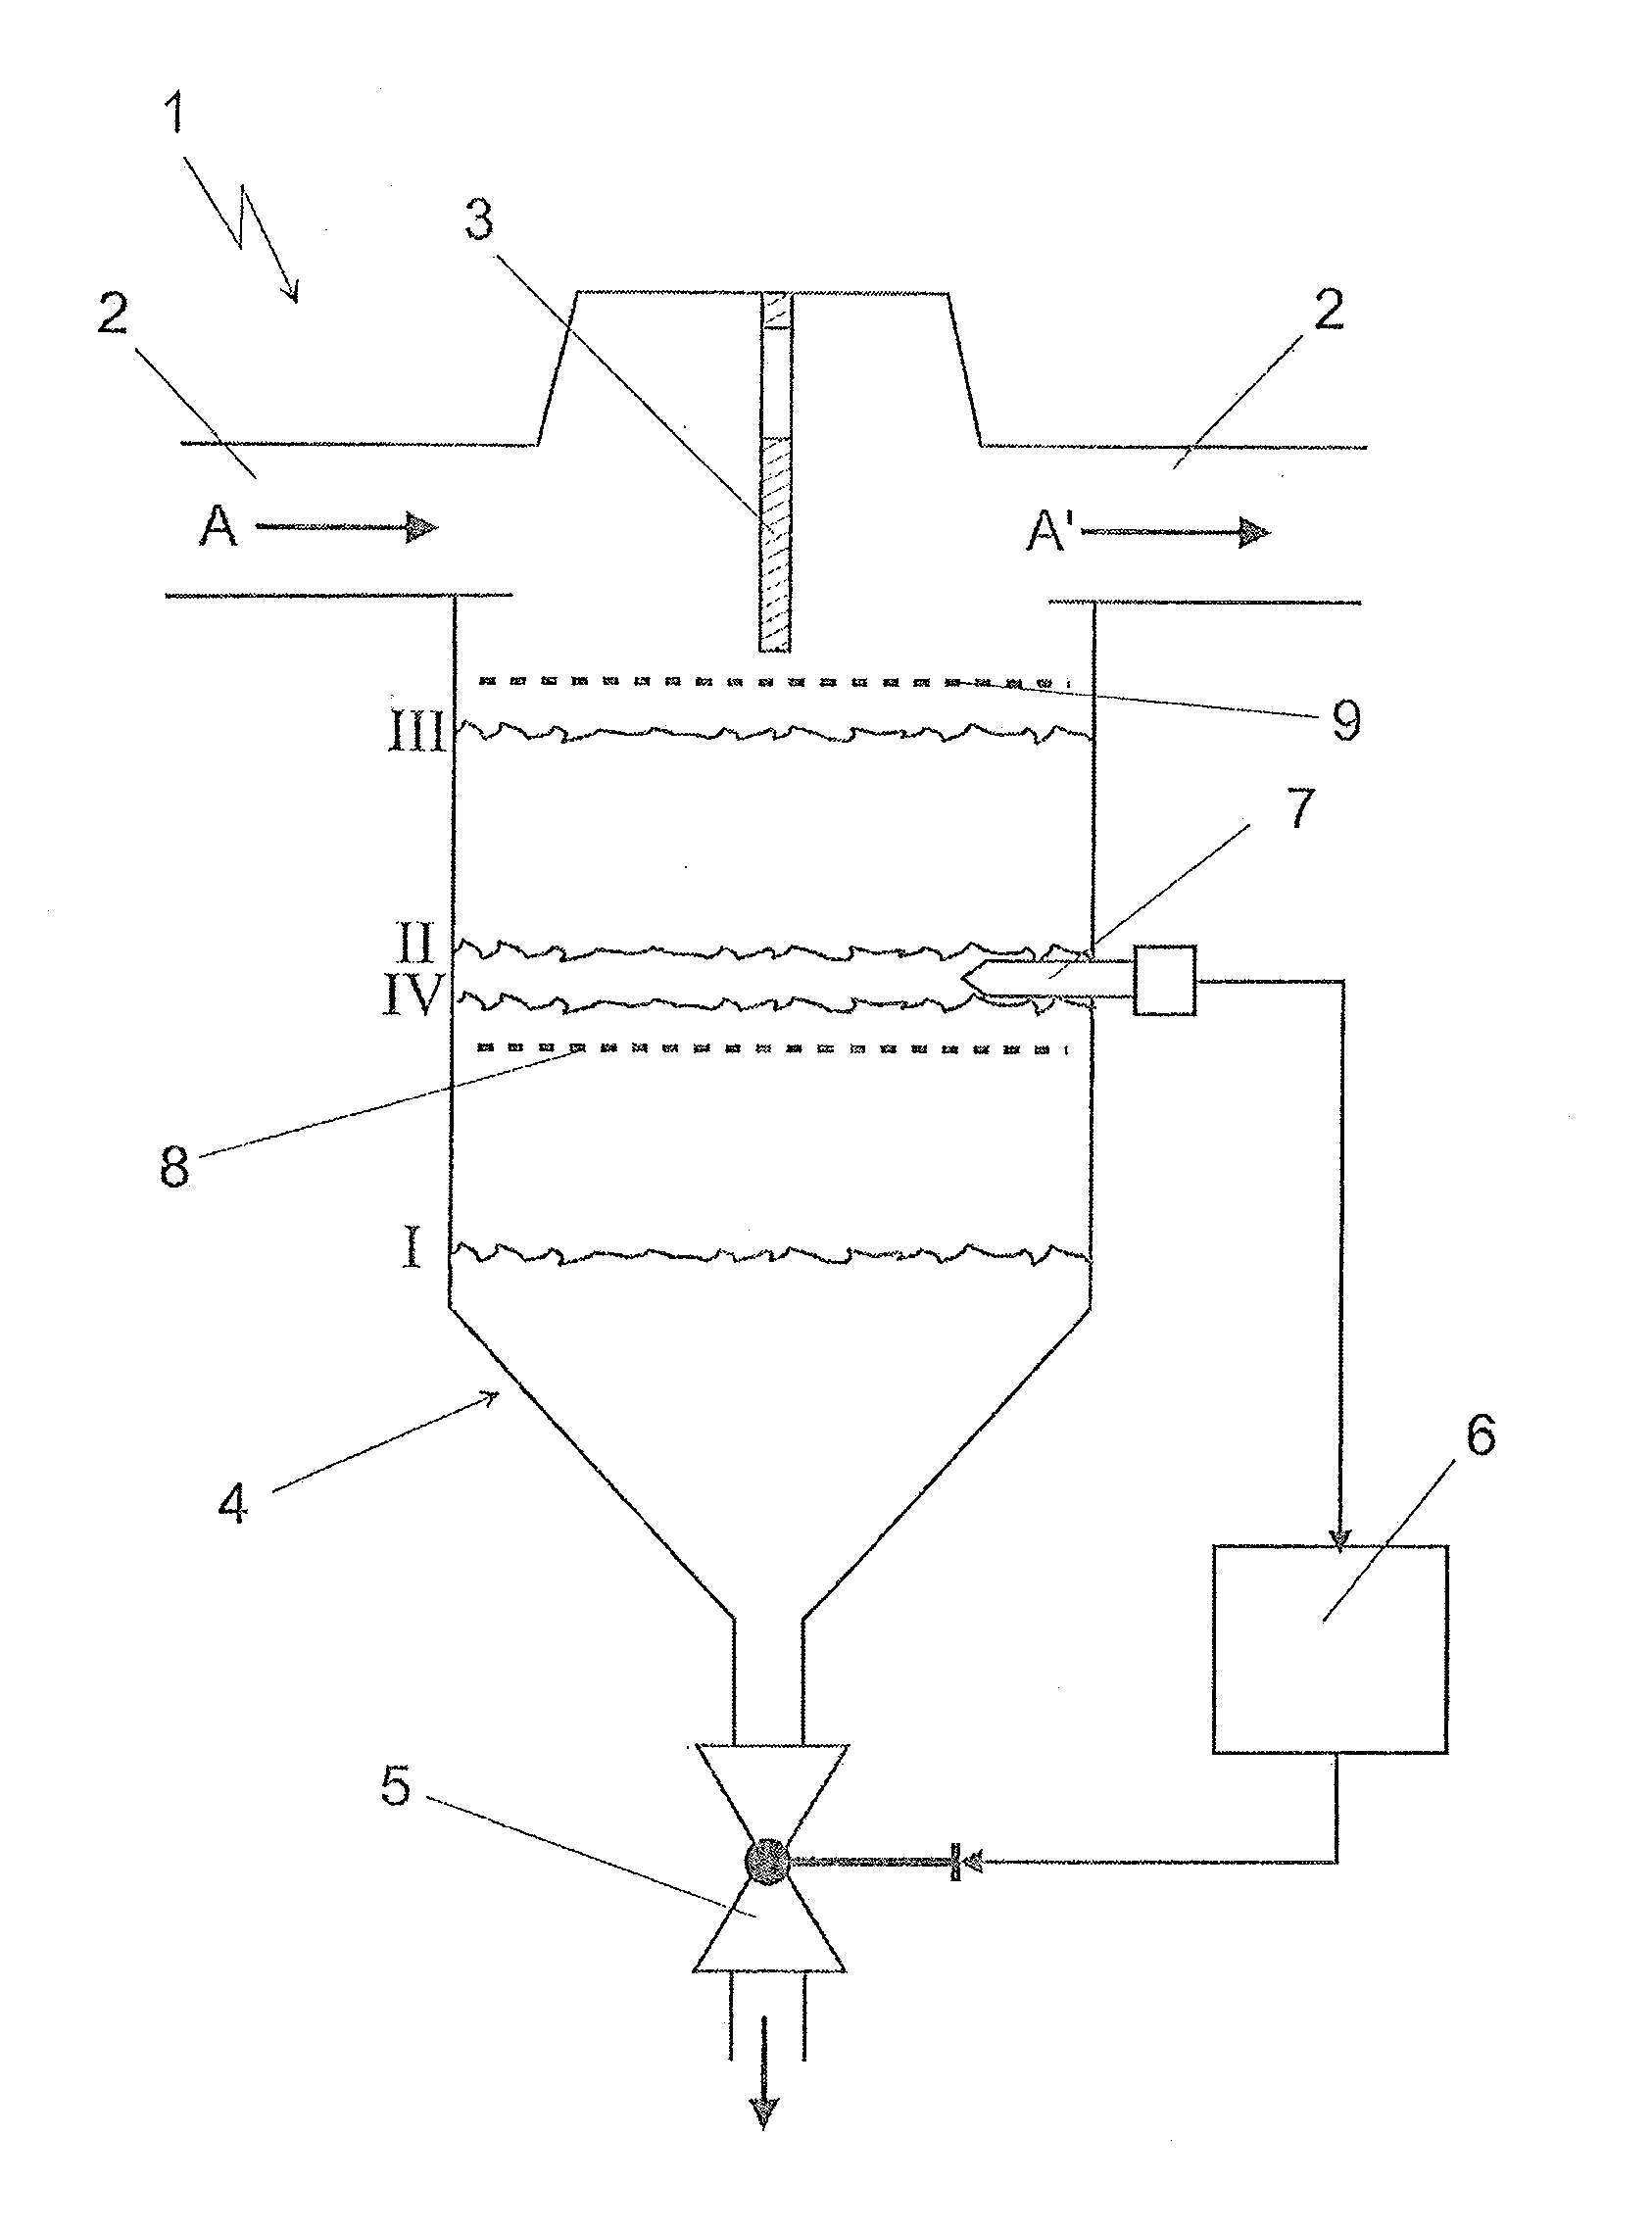 Method for Discontinuously Emptying a Container